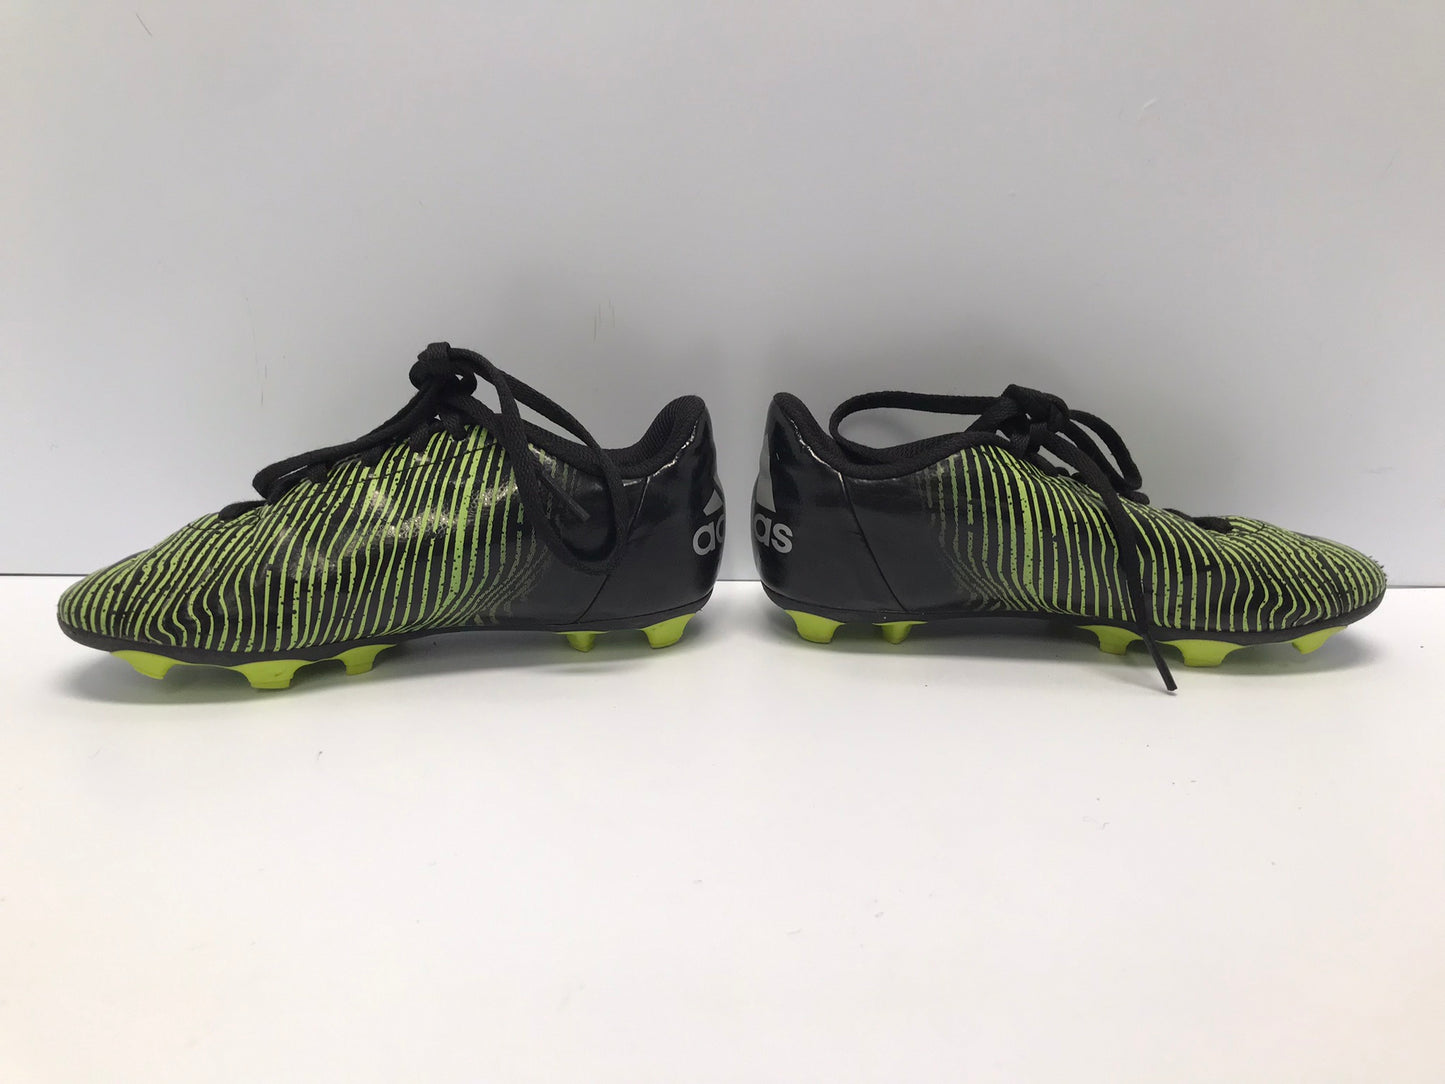 Soccer Shoes Cleats Child Size 1  Adidas Black Green New Demo Model